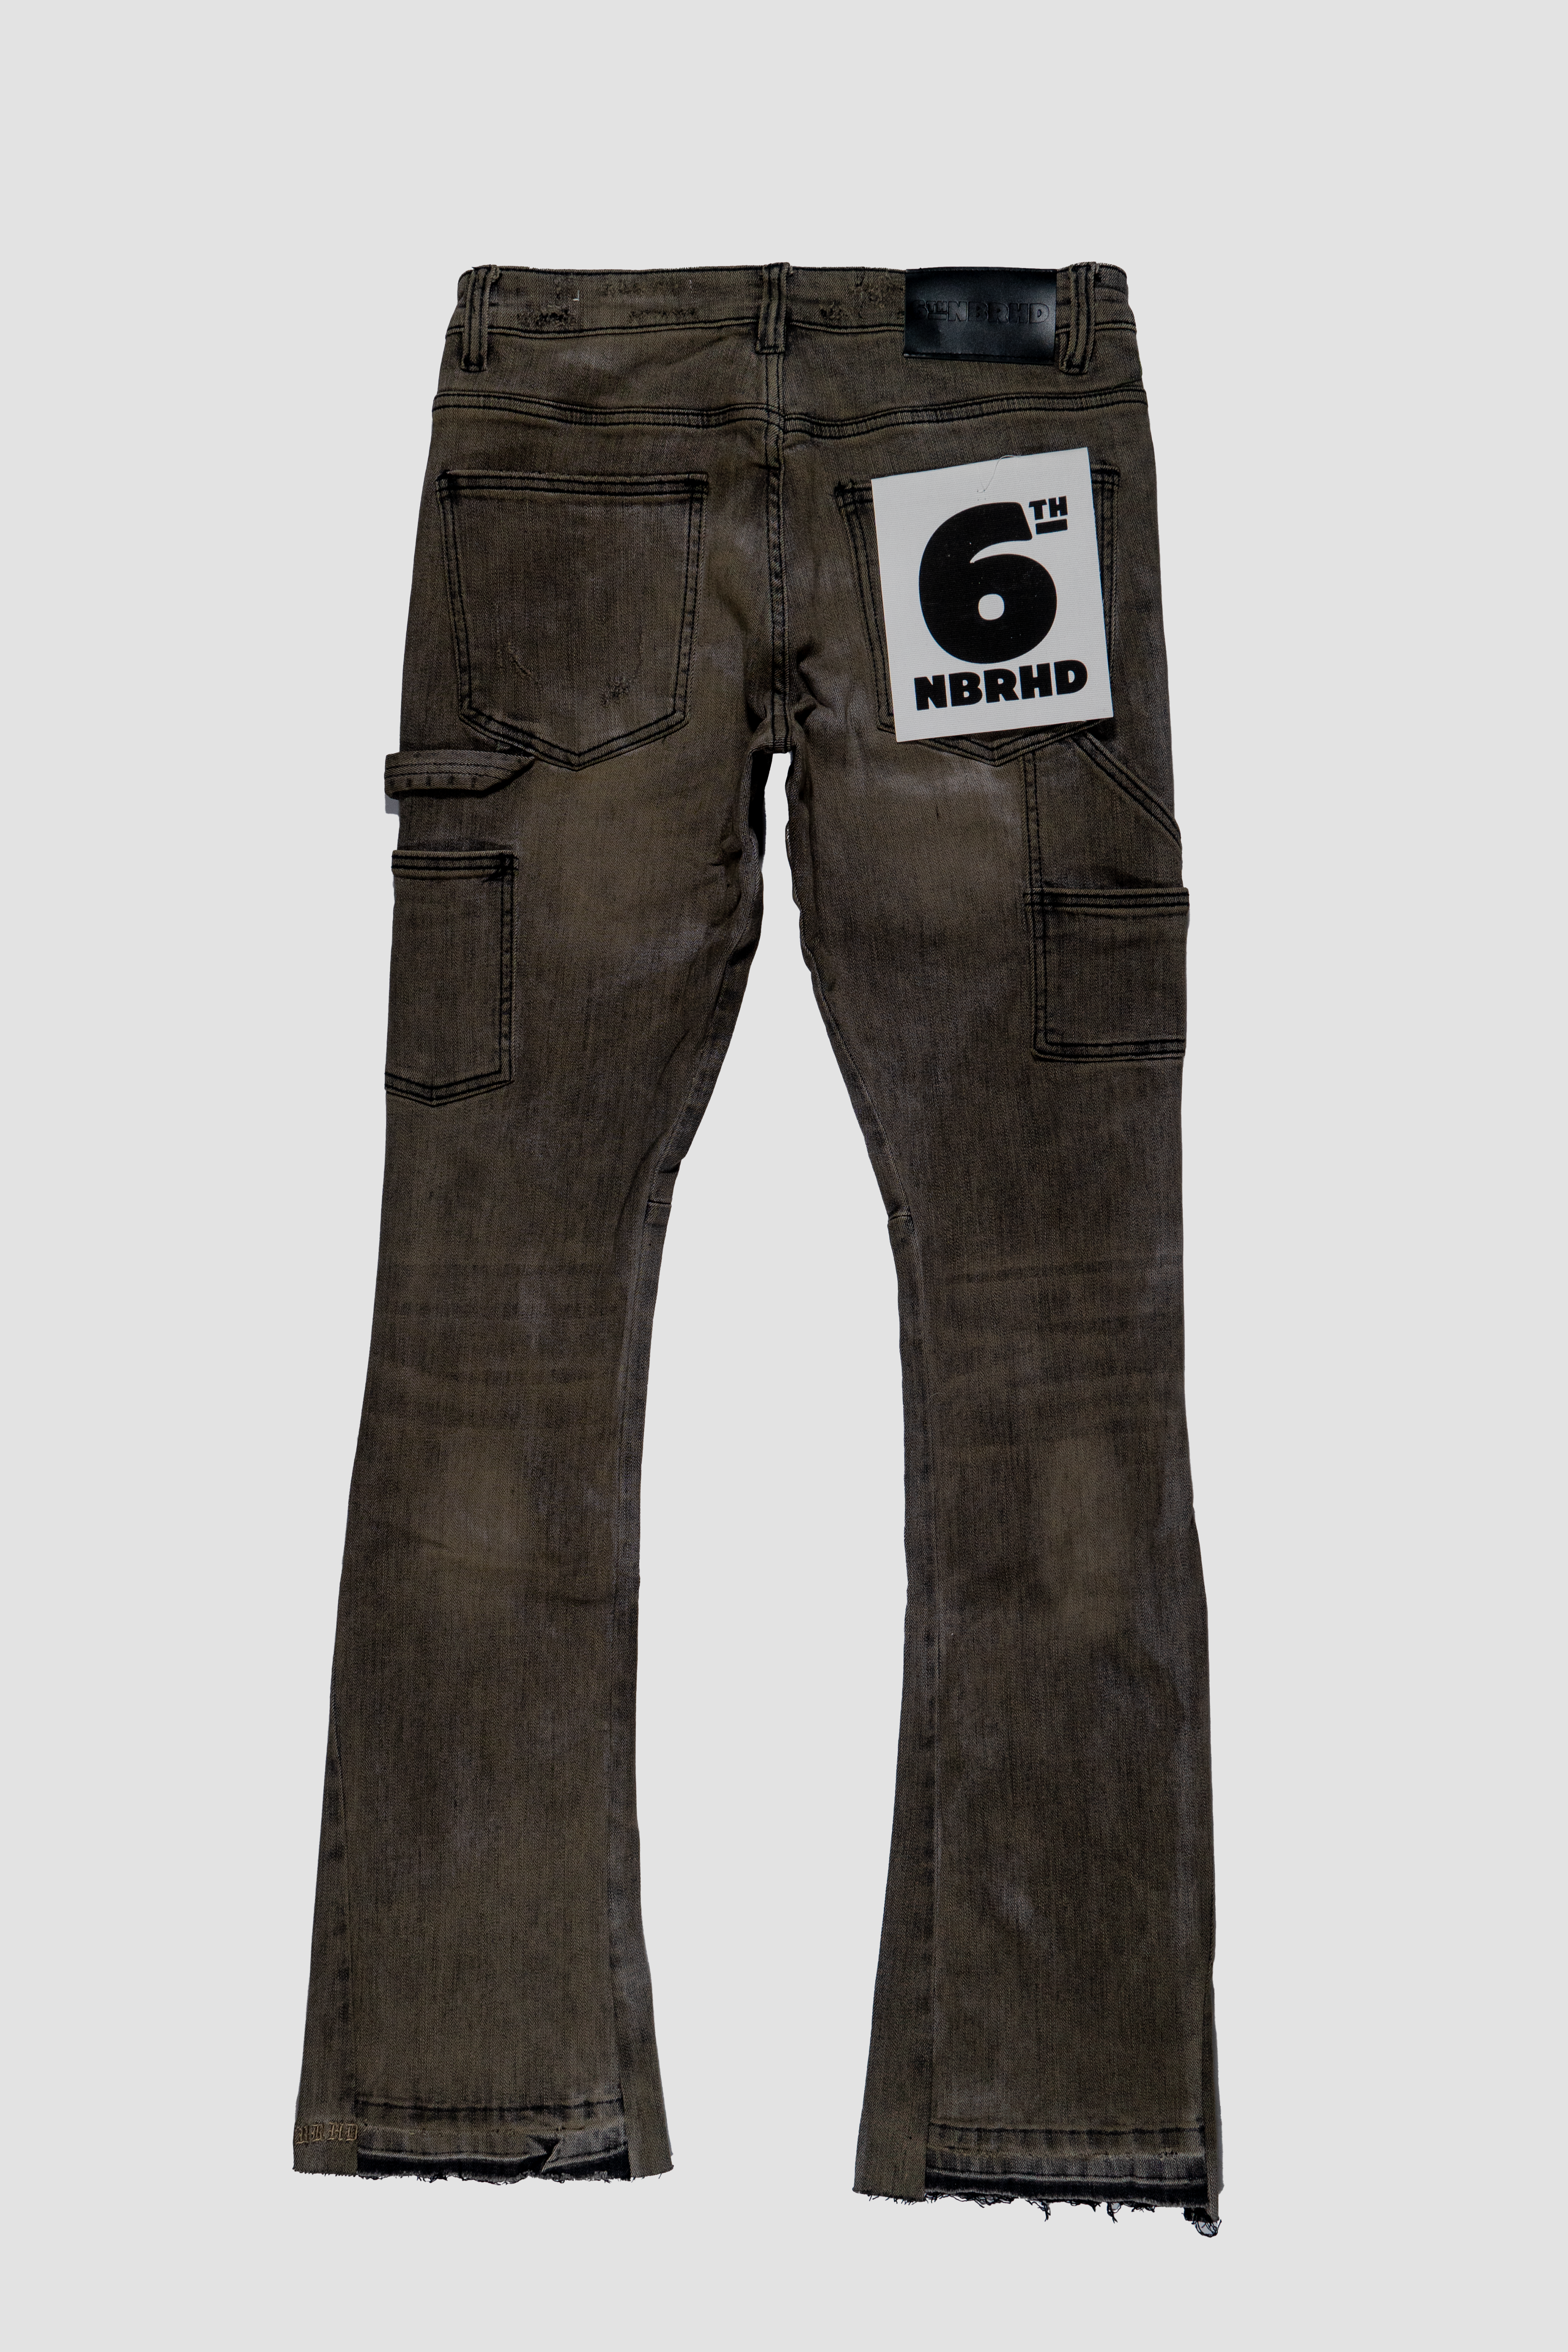 6thNBRHD STACKED "NEW FIELDS" -DIRTY GREY WASH